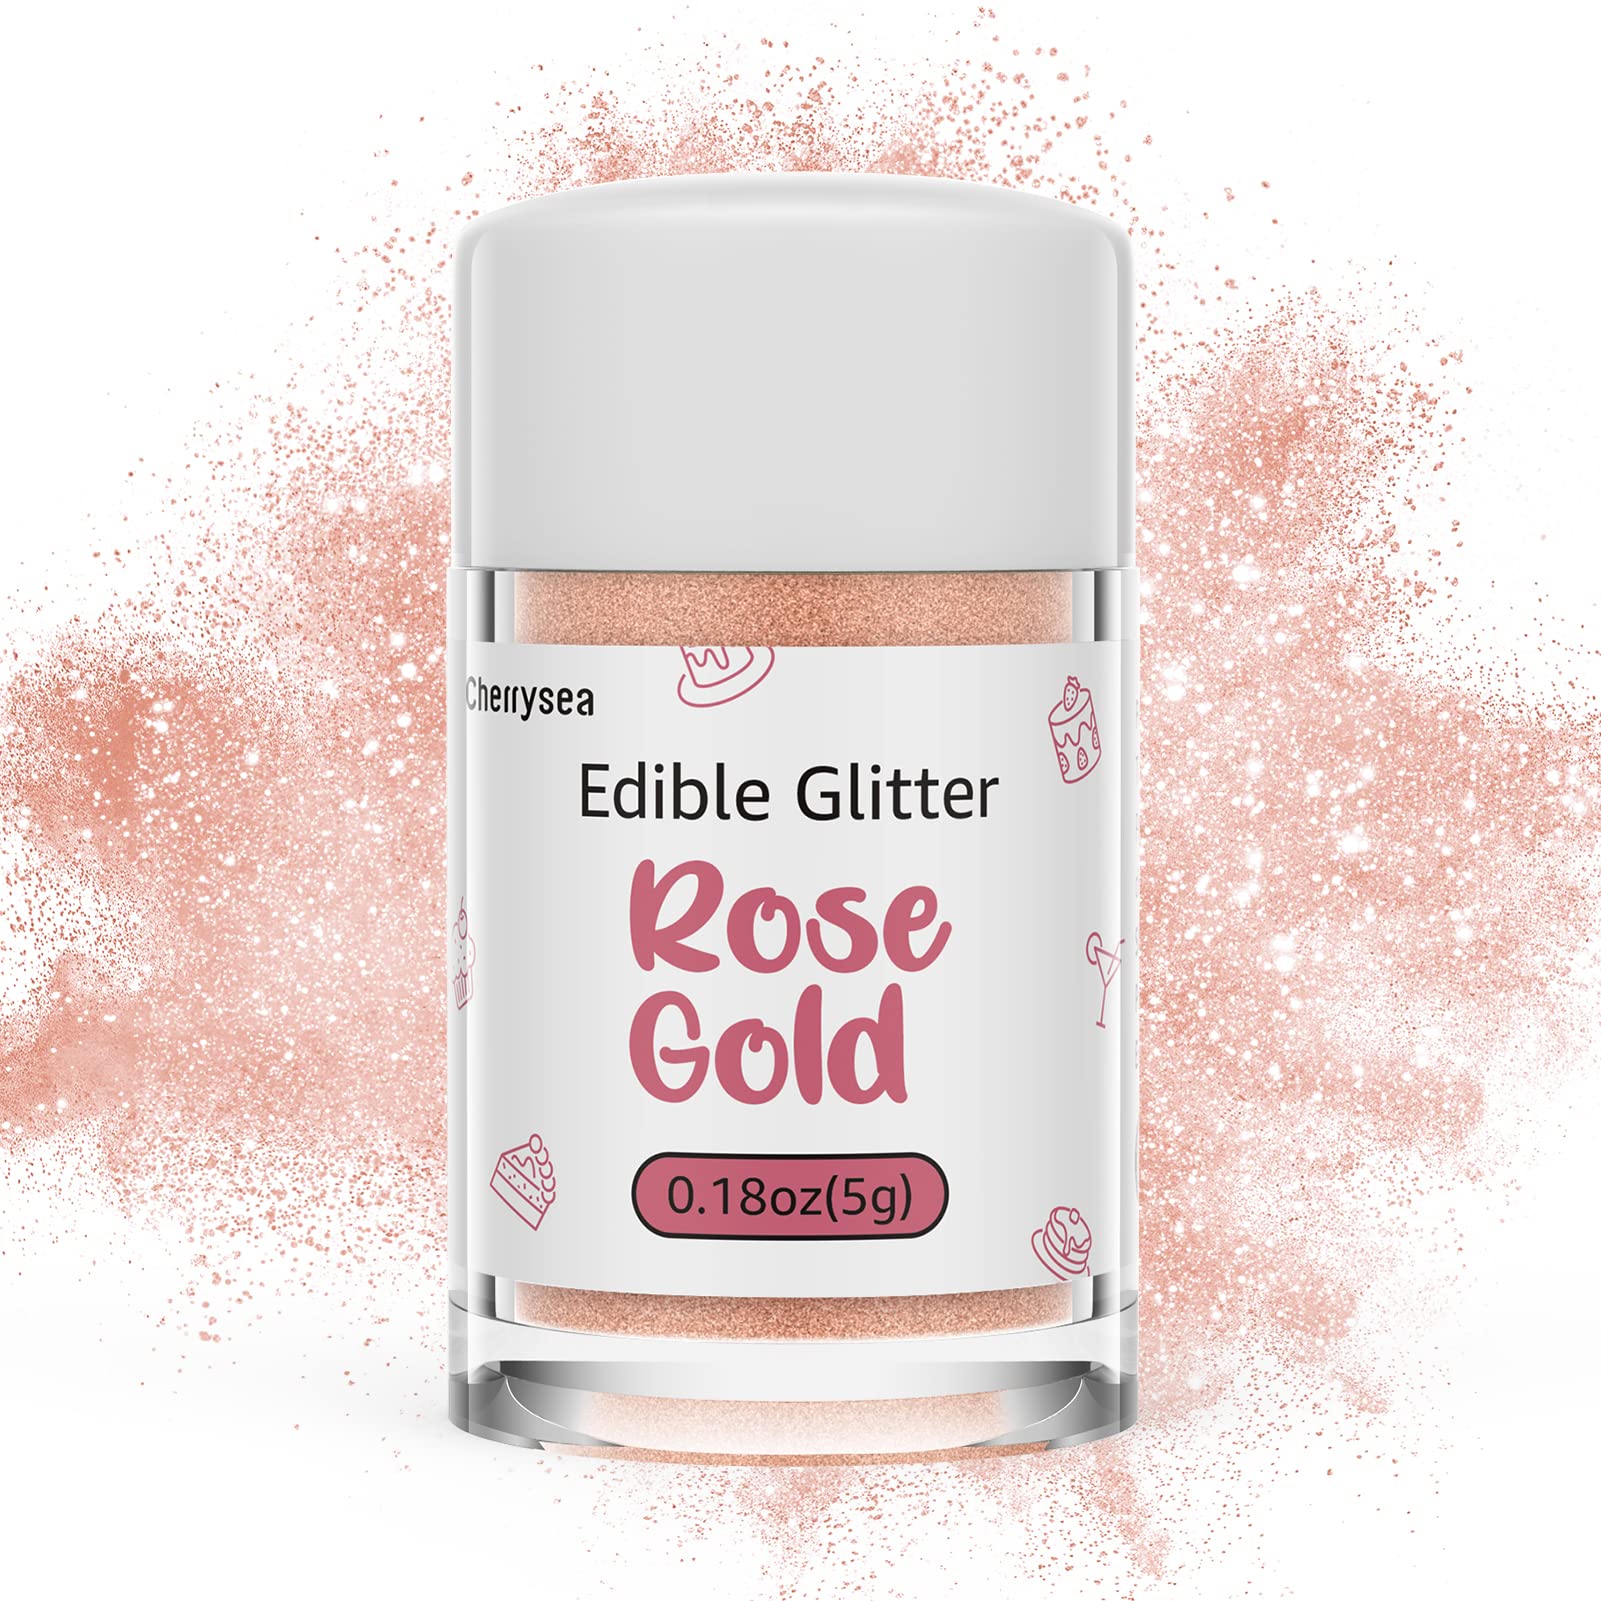 Cocktail Glitter Pump Edible Glitter for Drinks & Cocktails 